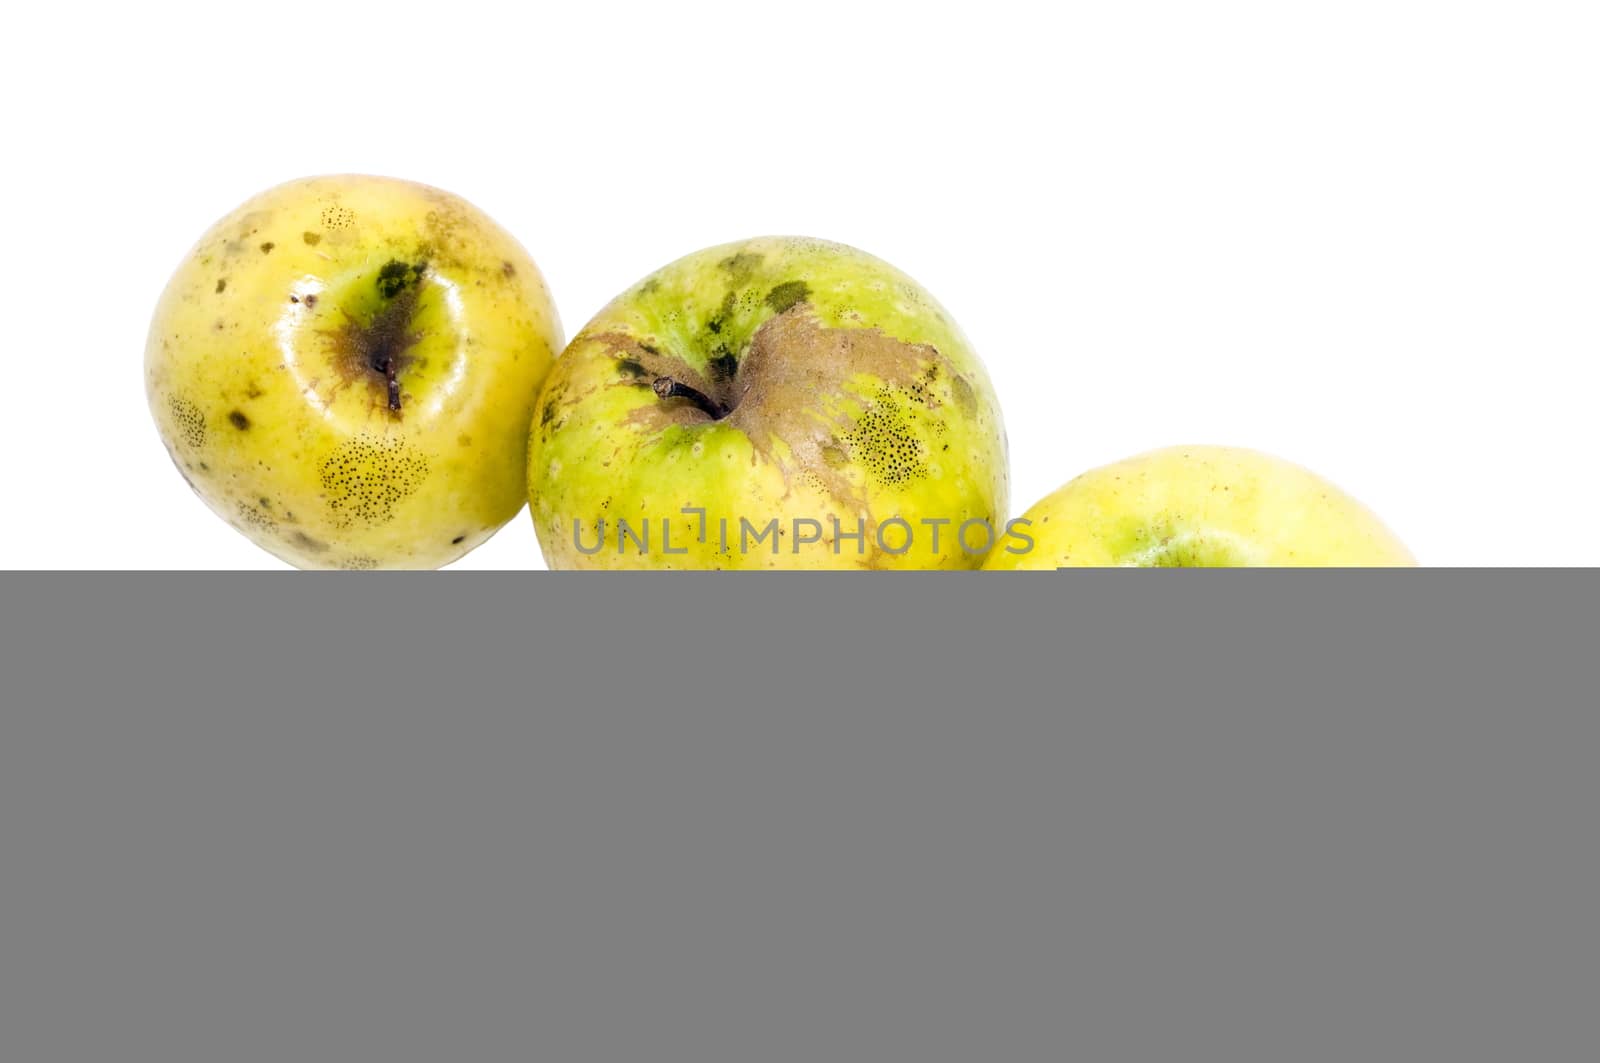 three yellow organic apples on a white background